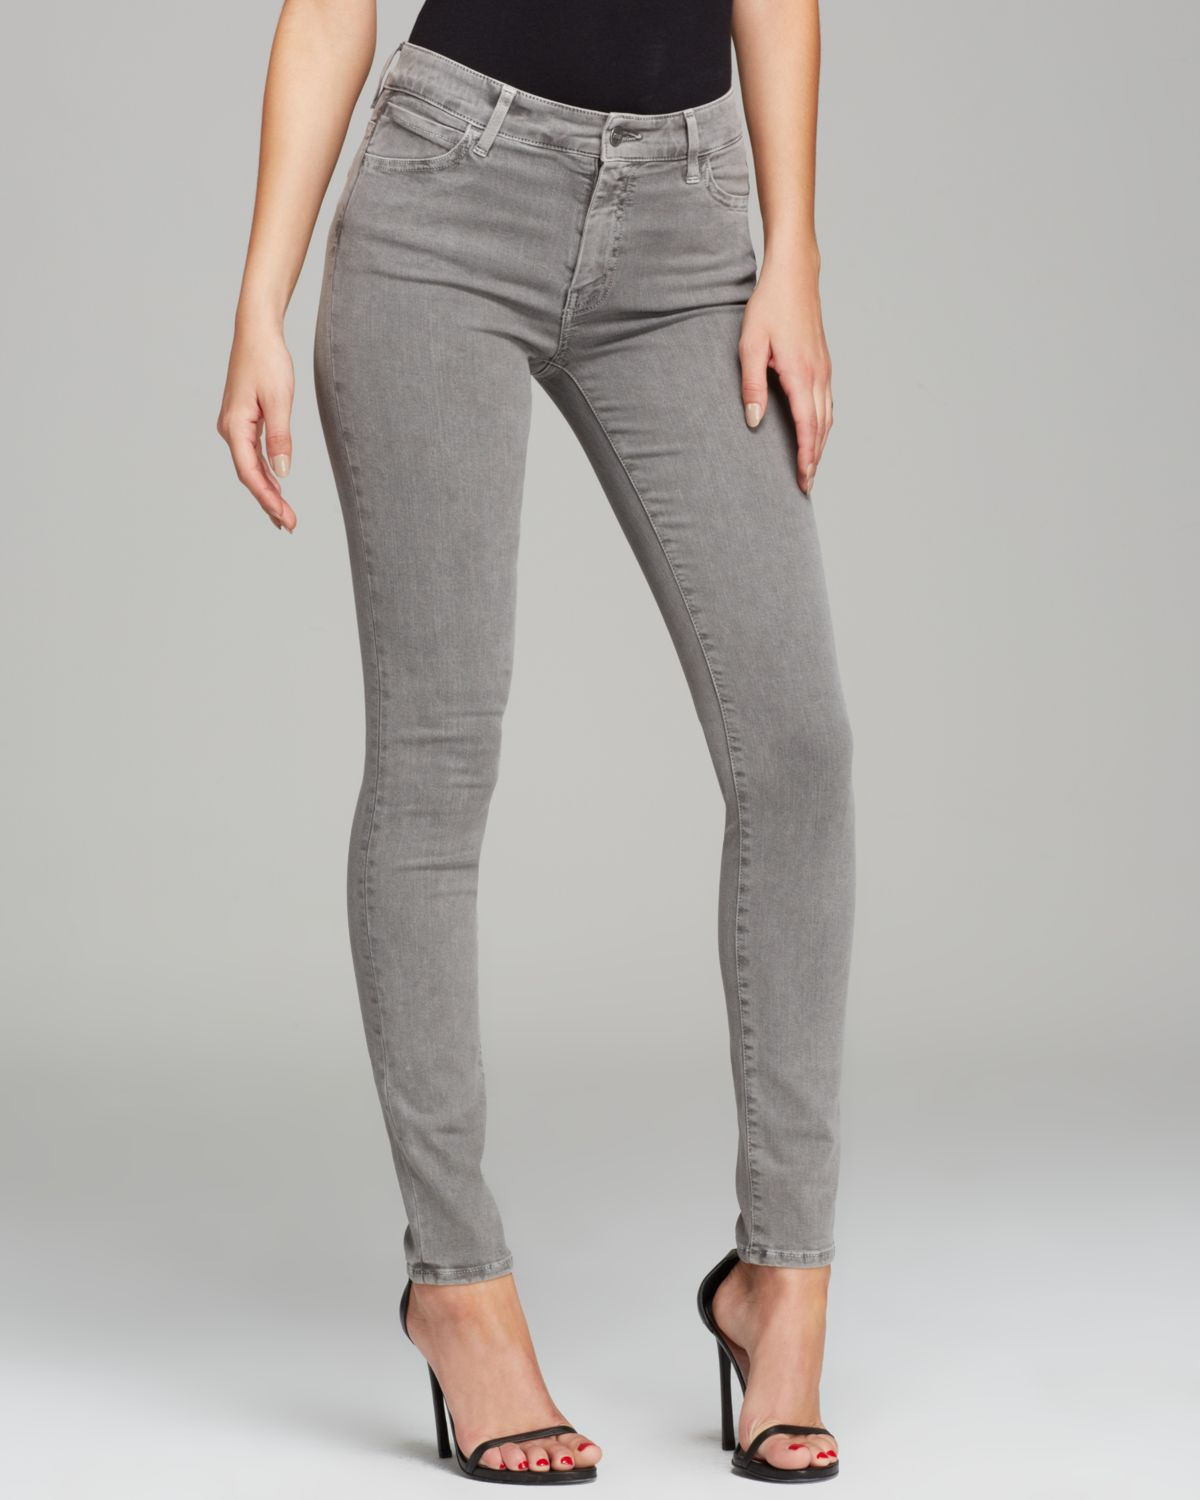 Lyst - Koral Jeans High Rise Skinny in Pebble Coated Grey in Gray